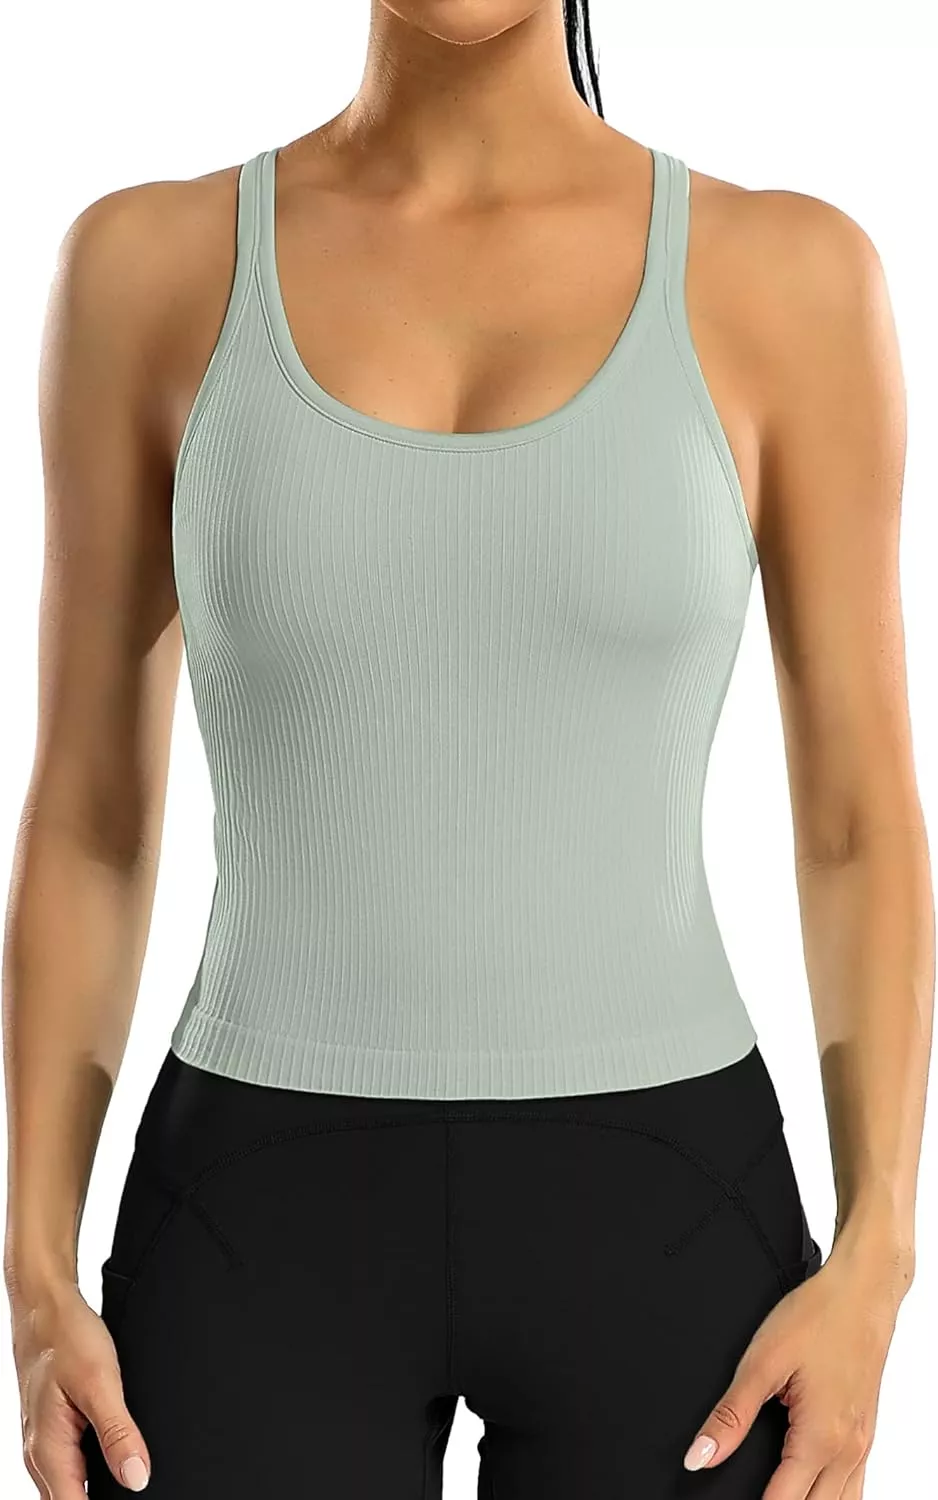 Attraco ATTRACO Built-in Bra Yoga Tank Tops for Women Workout Golf